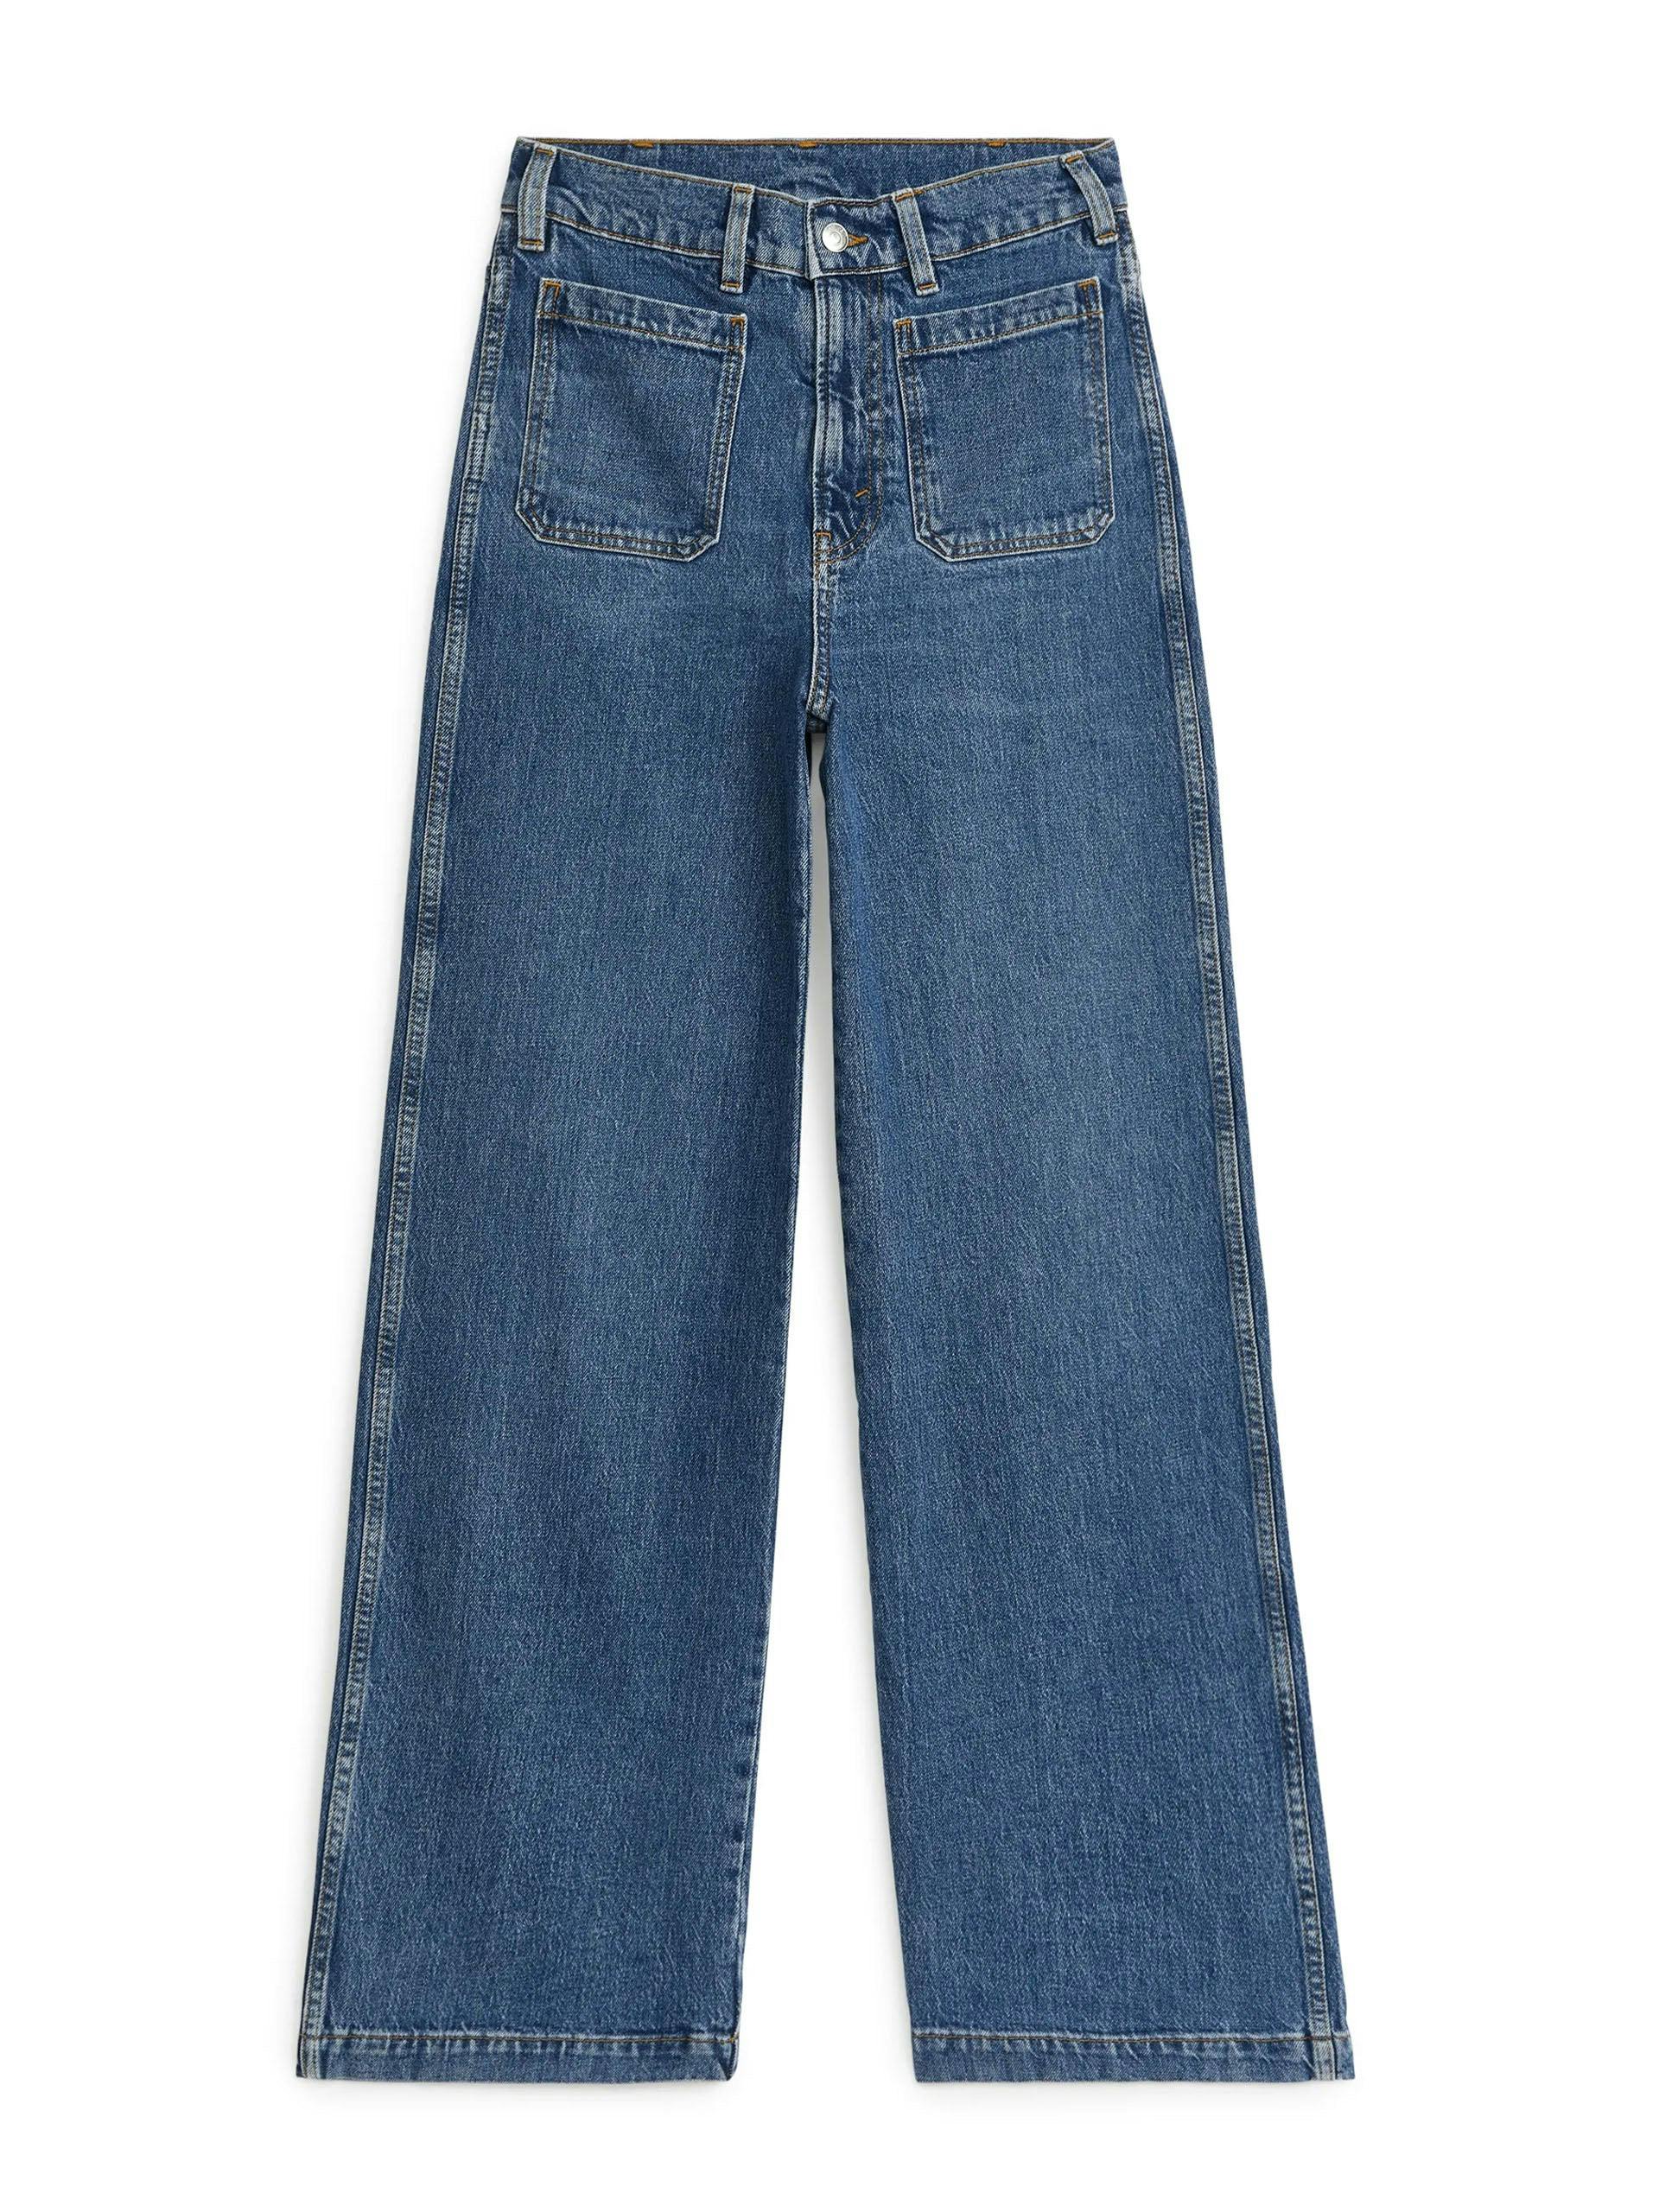 Lupine high flared stretch jeans